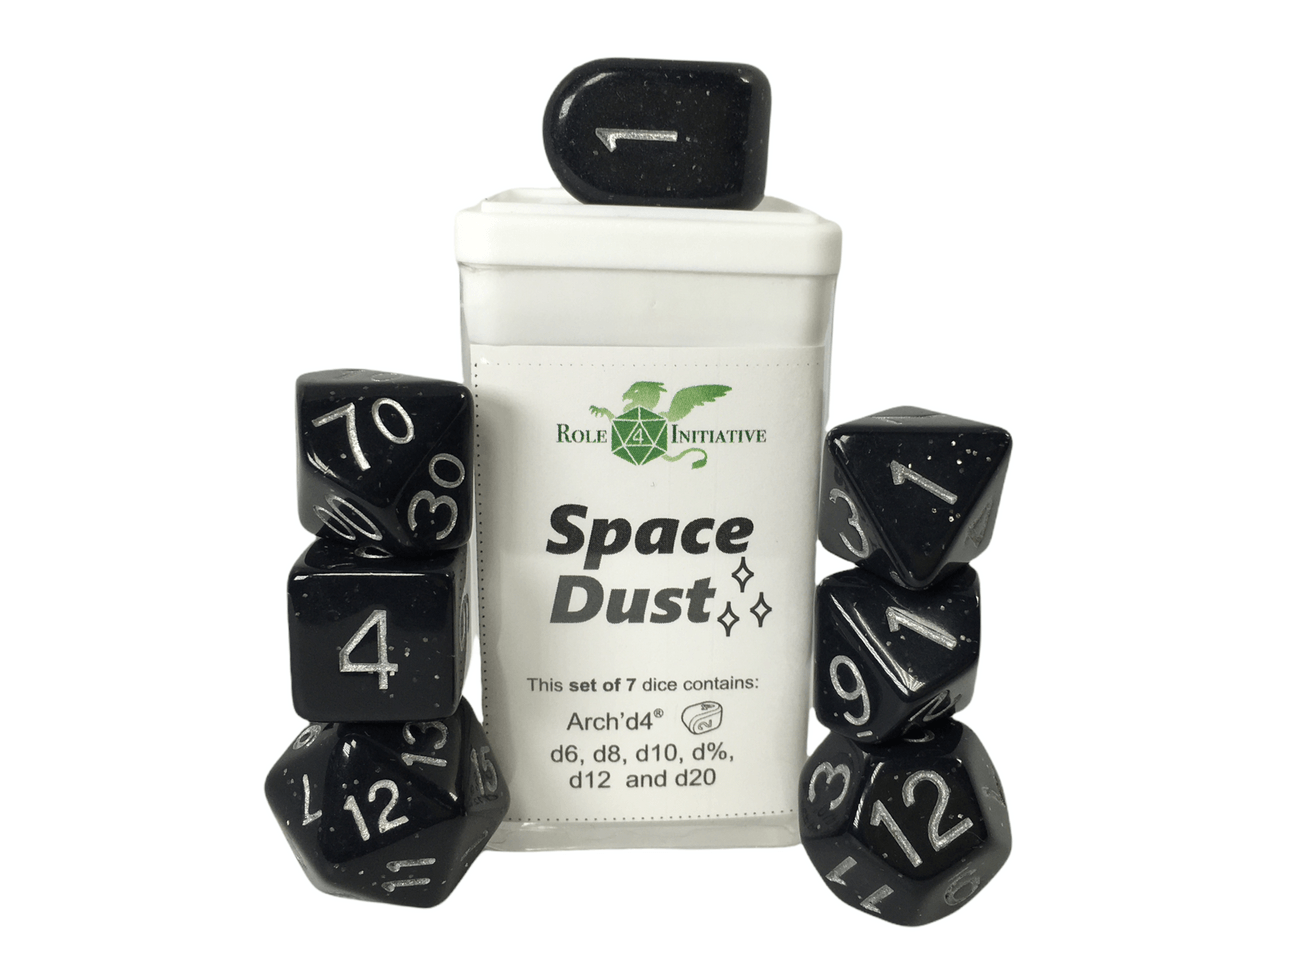 Space Dust - 7 dice set (with Arch’d4™) - The Fourth Place